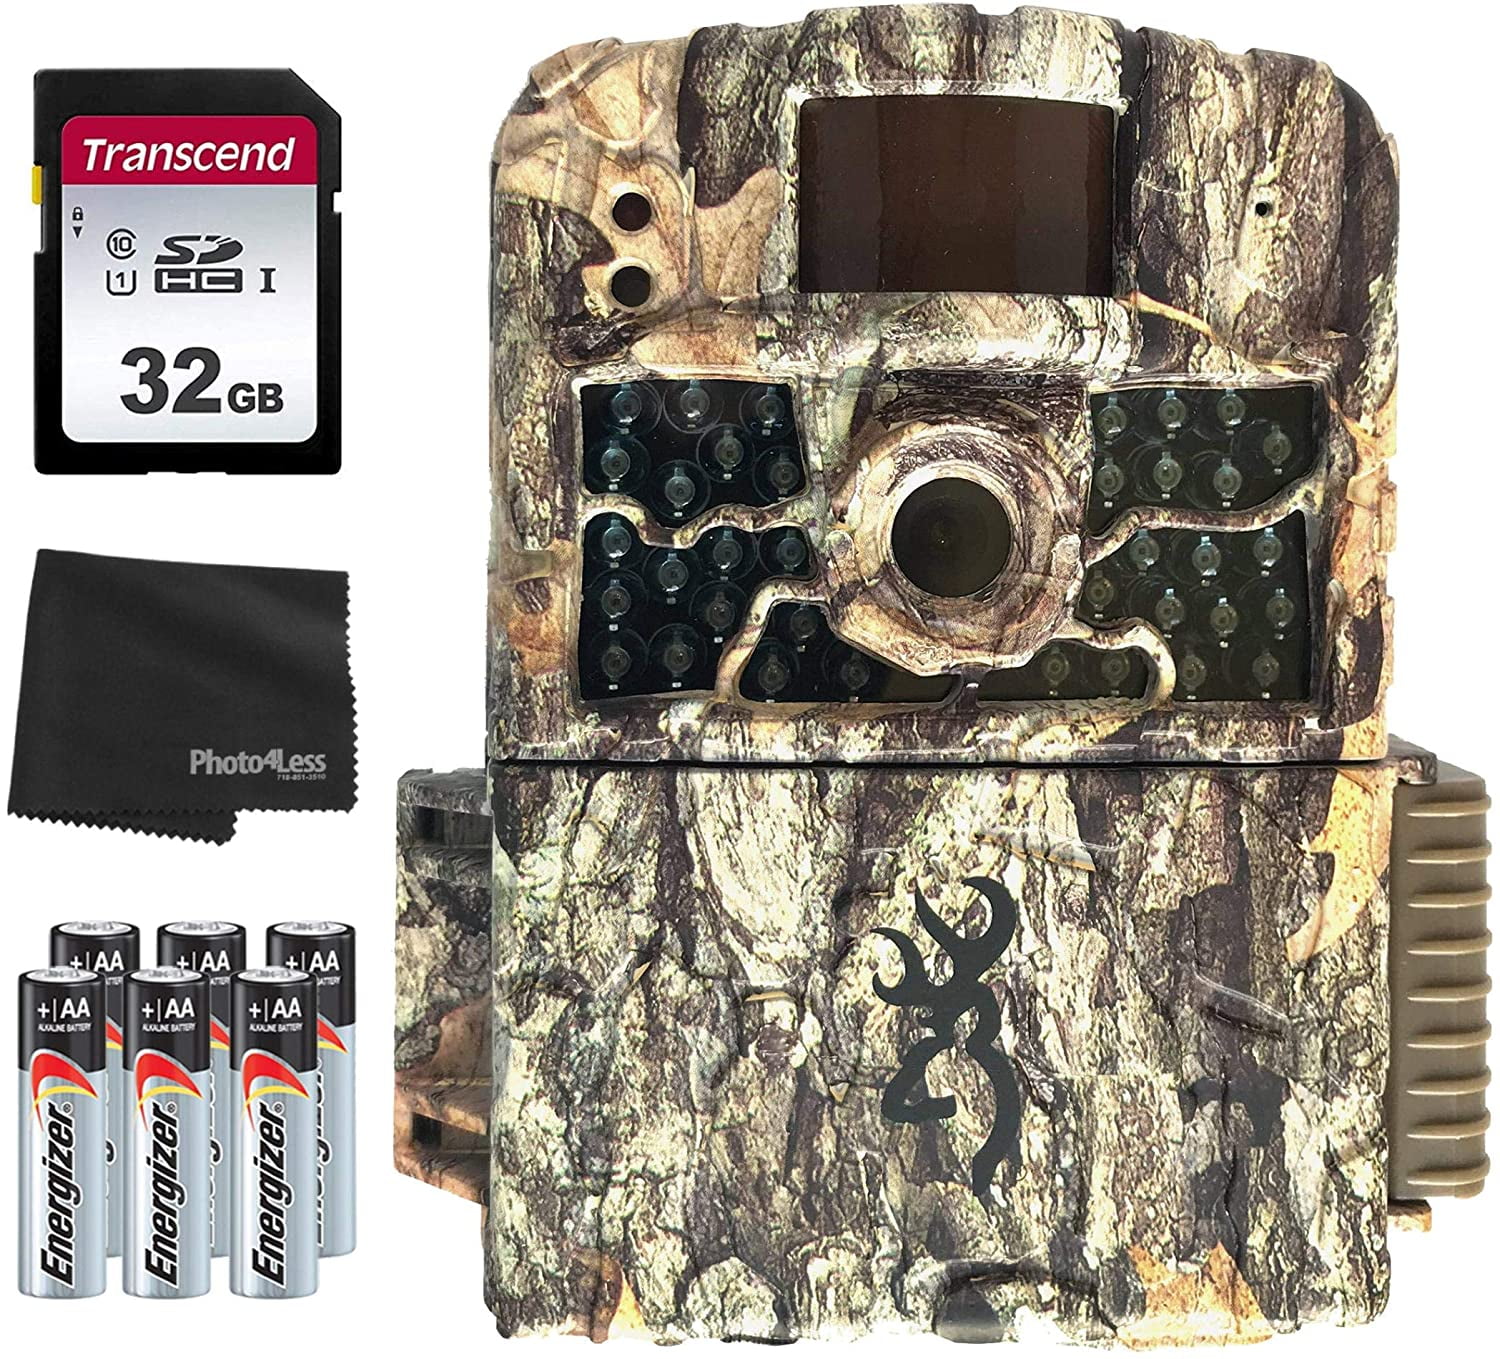 Browning strike force hd trail camera btc 5hd cryptocurrency for traveling